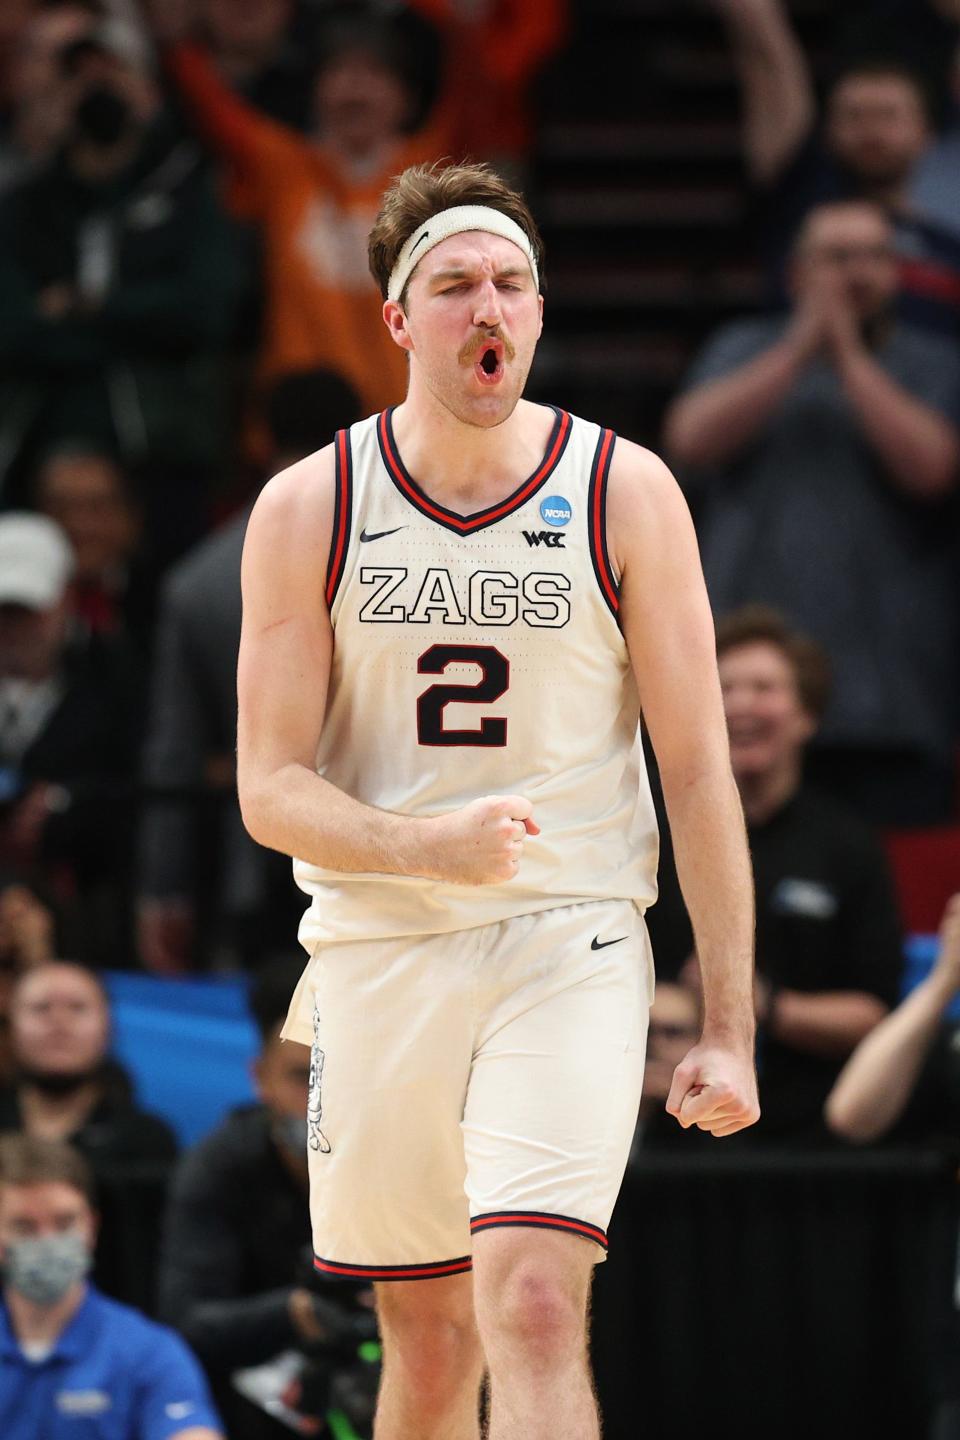 Will Gonzaga beat Arkansas in the Sweet 16 of the NCAA Tournament?